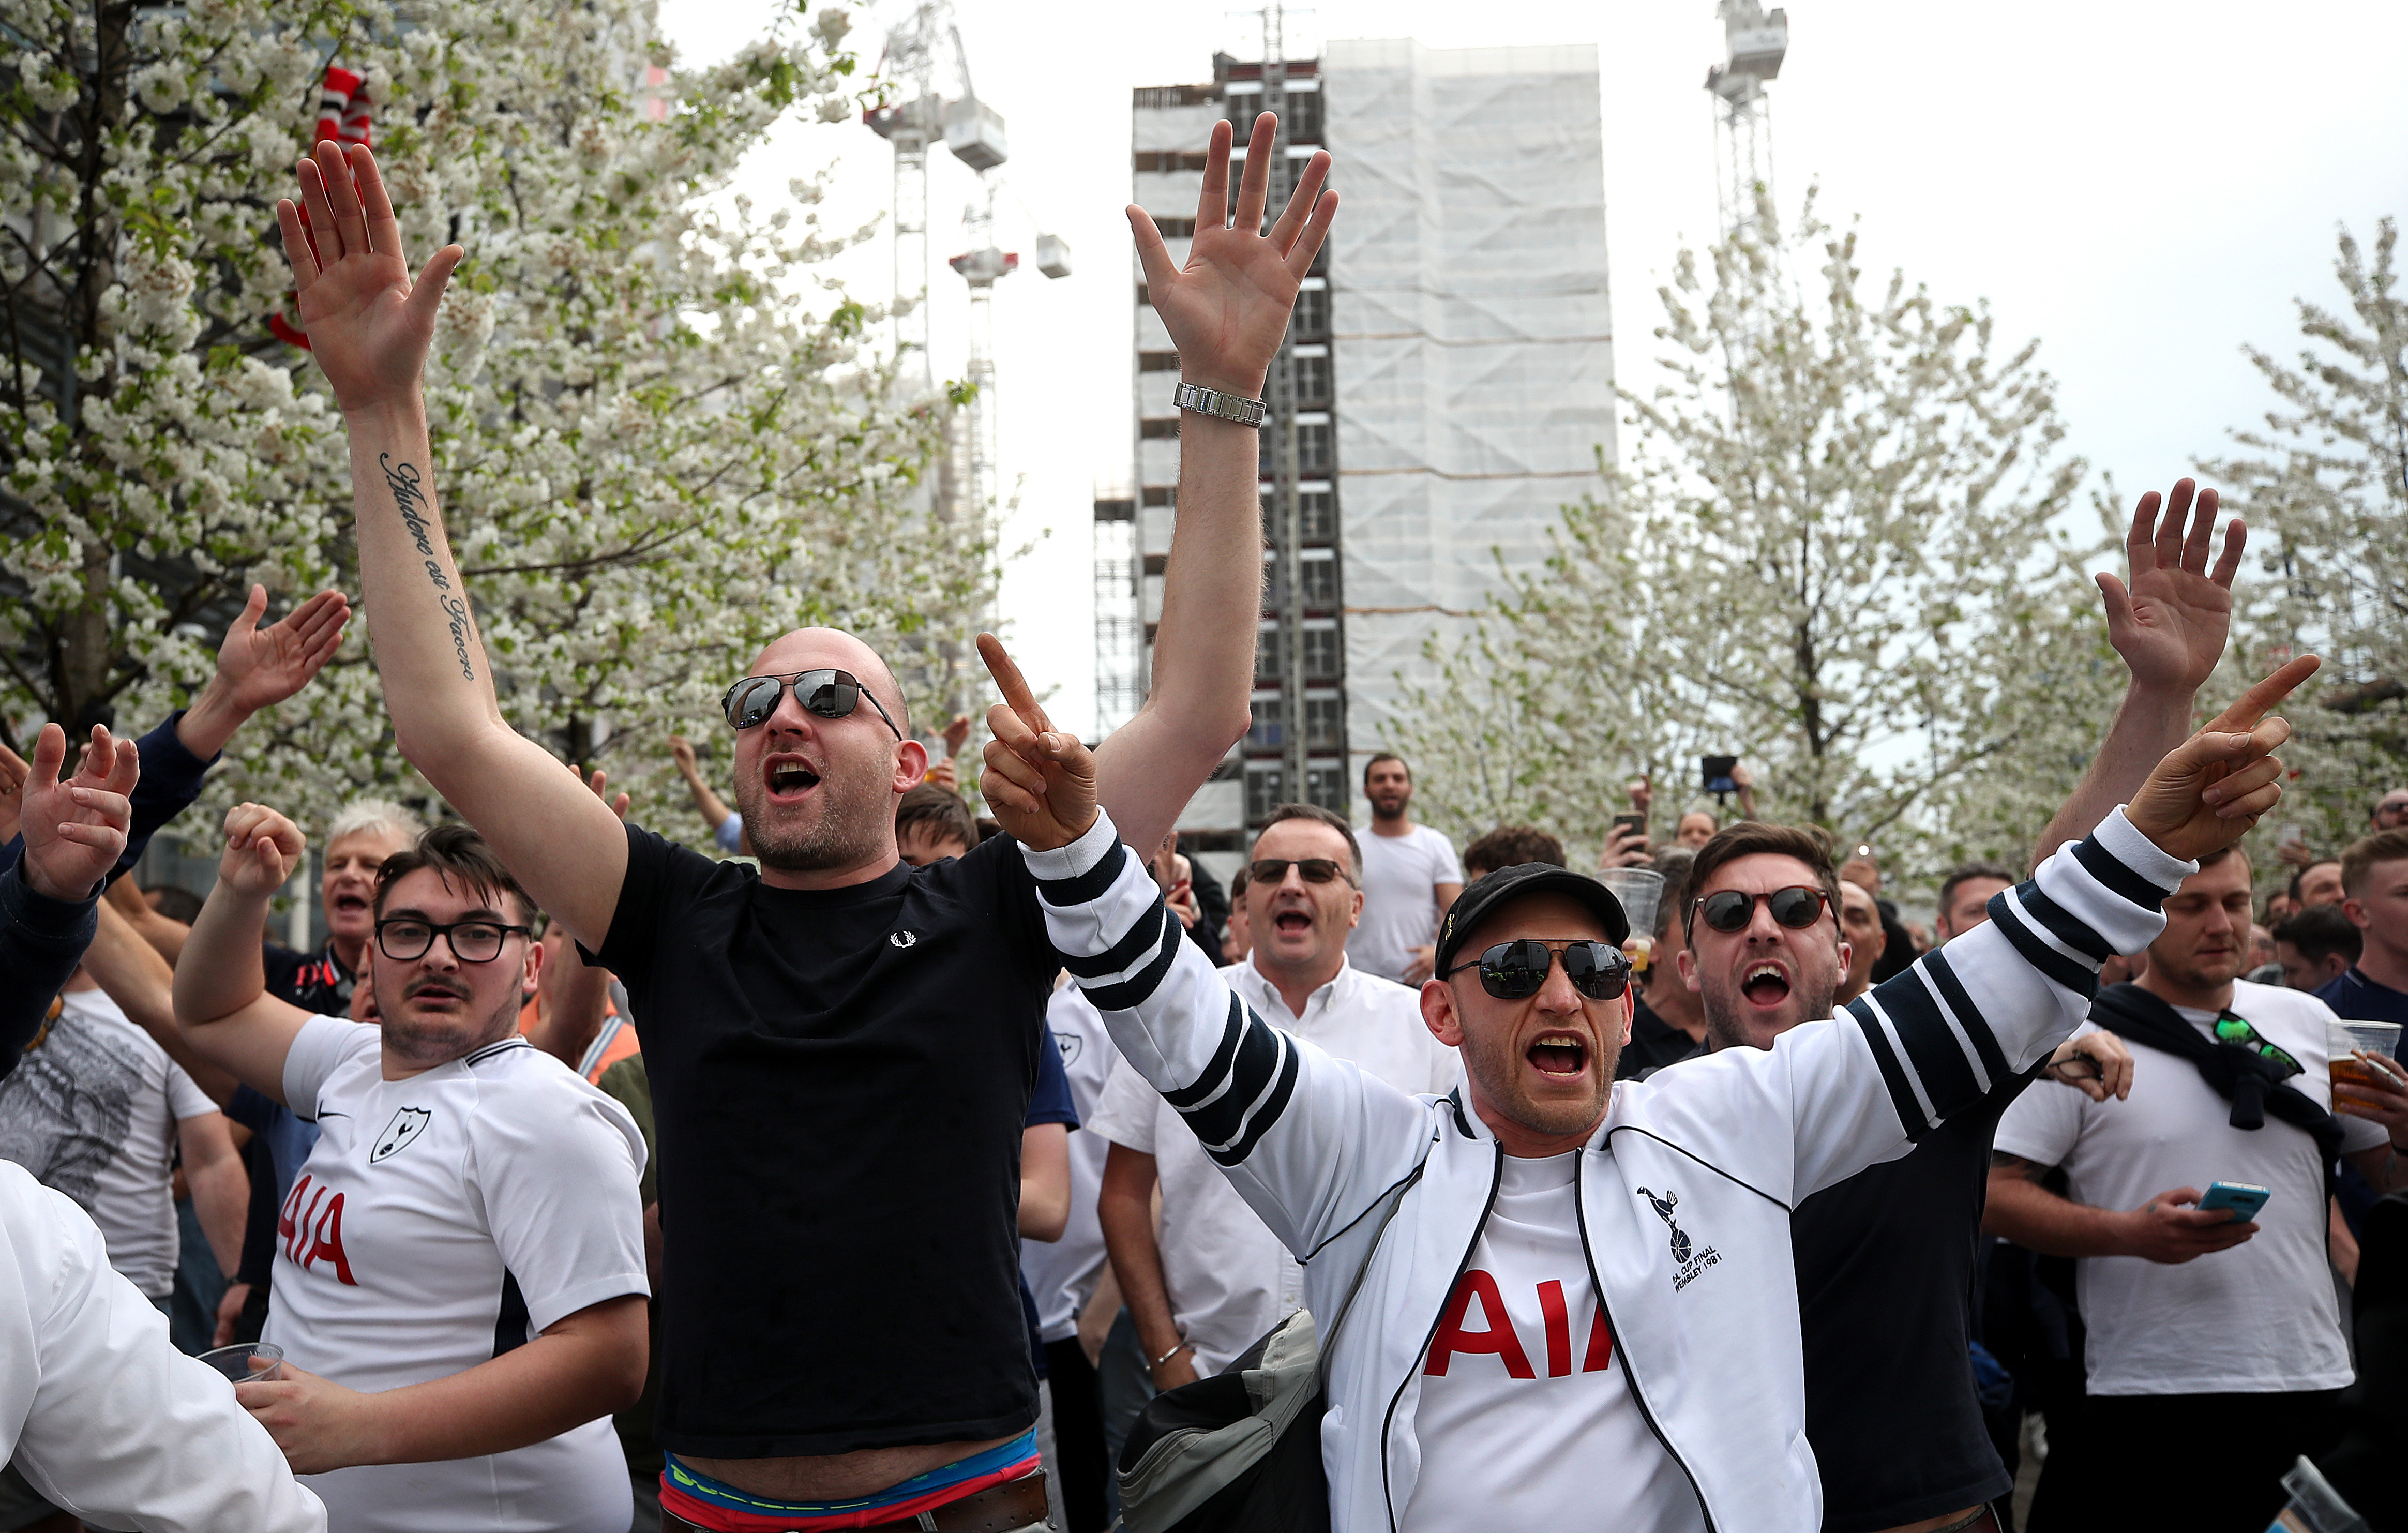 When Spurs fans it is the opposite of derogatory The Jewish Chronicle